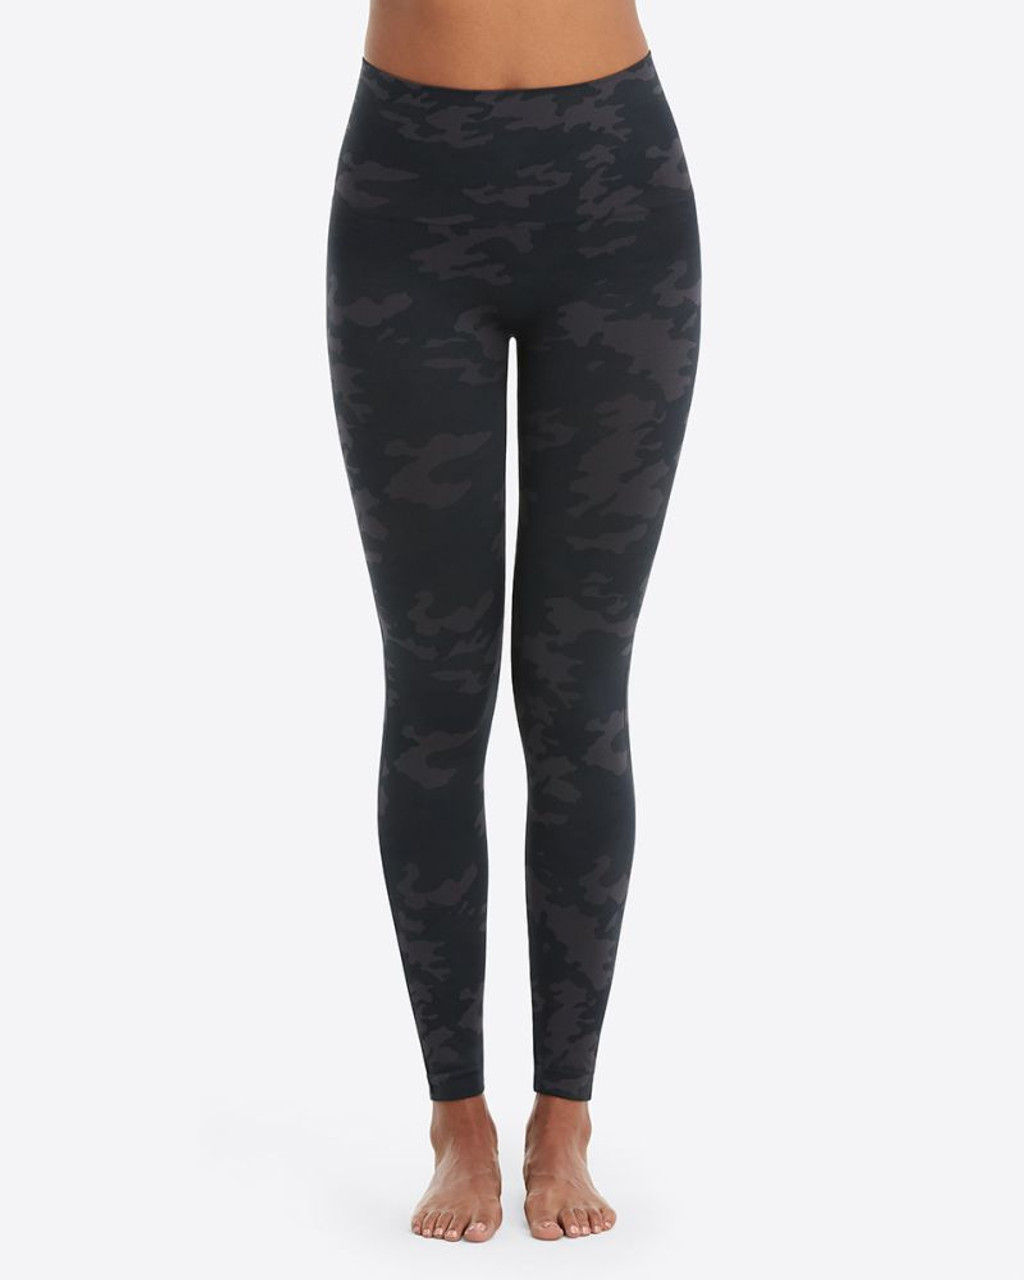 Look At Me Now Seamless Leggings - Black Camo - Monkee's of Raleigh